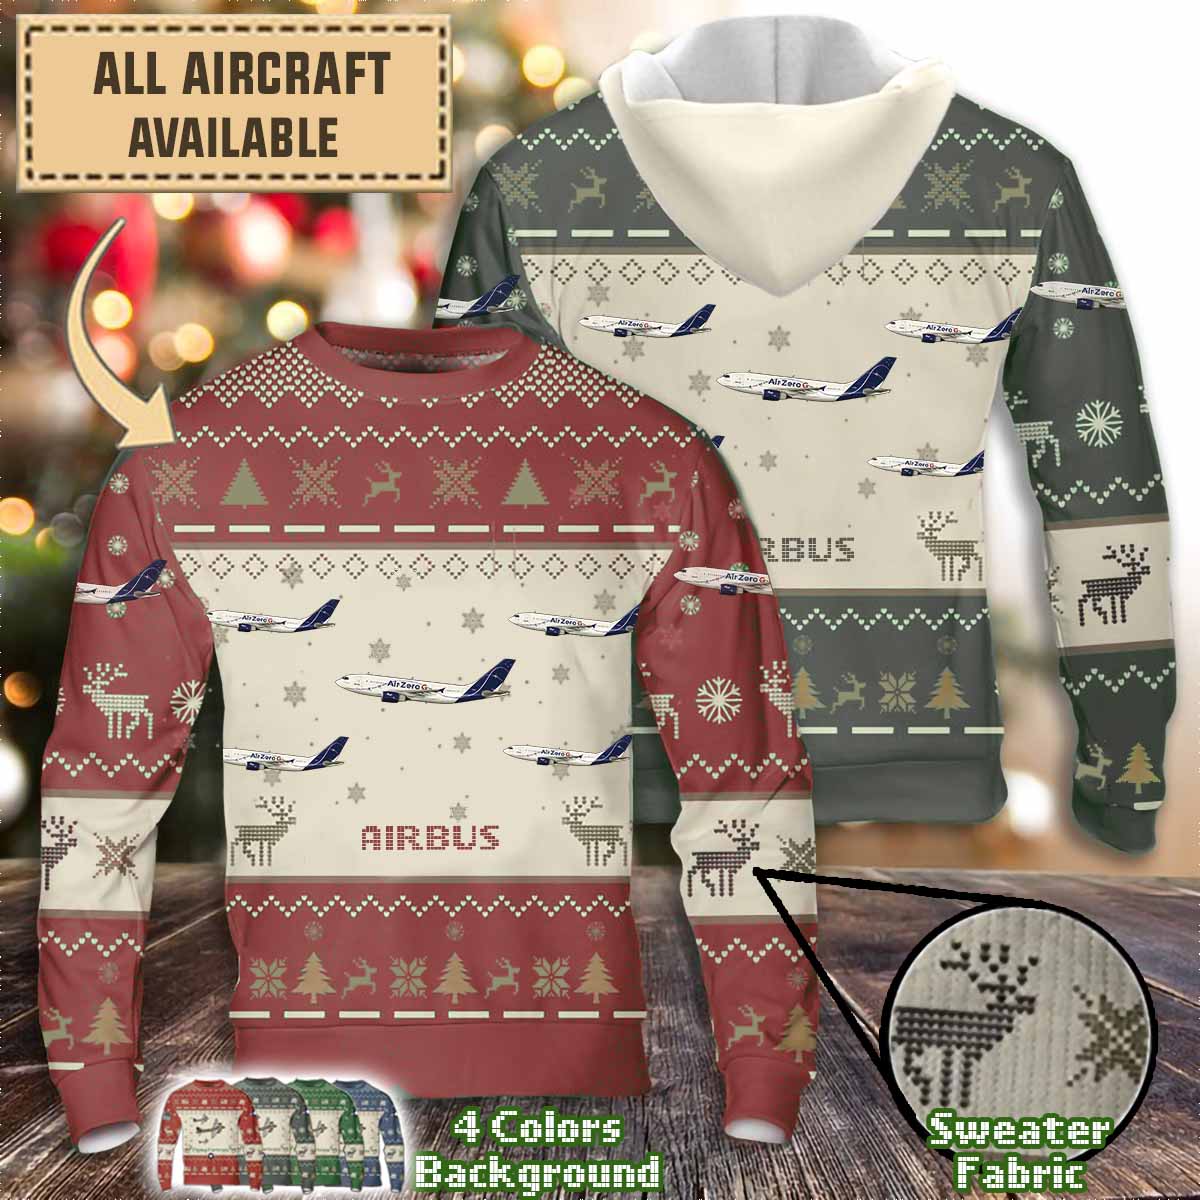 airbus a300 a310aircraft sweater hiw42